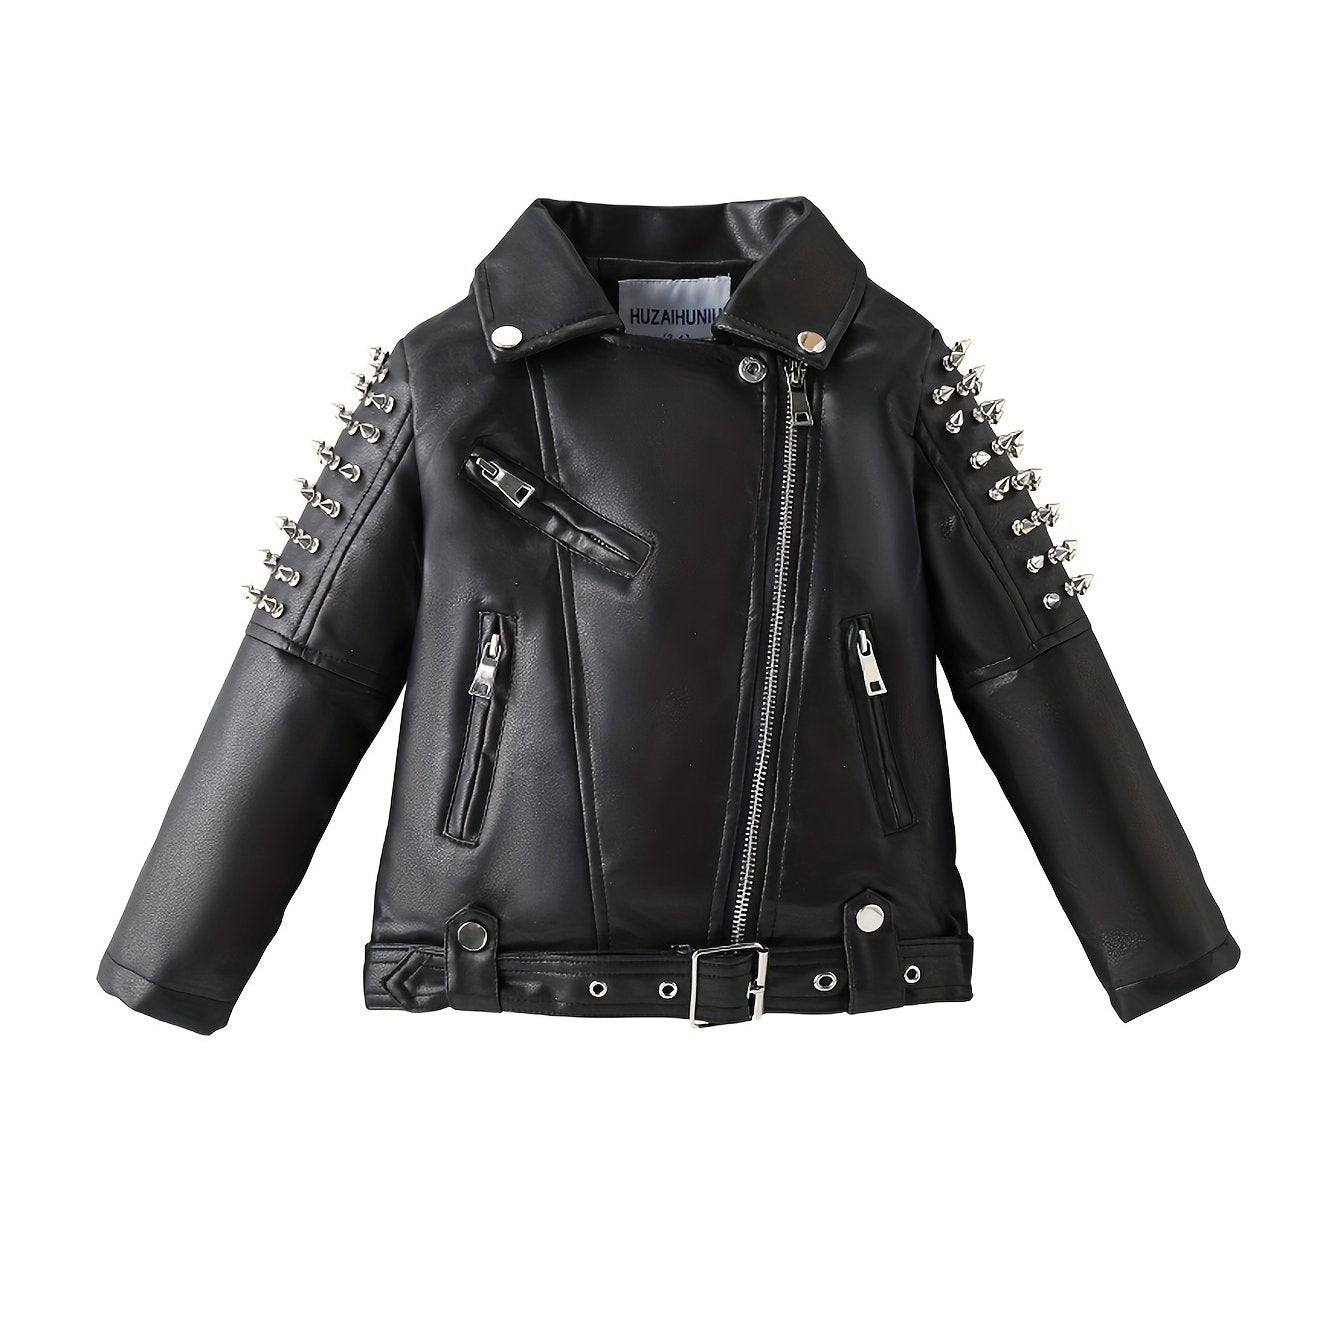 Discover Your Distinctive Style with Our Exclusive Gothic Jacket Collection - CasualFlowshop